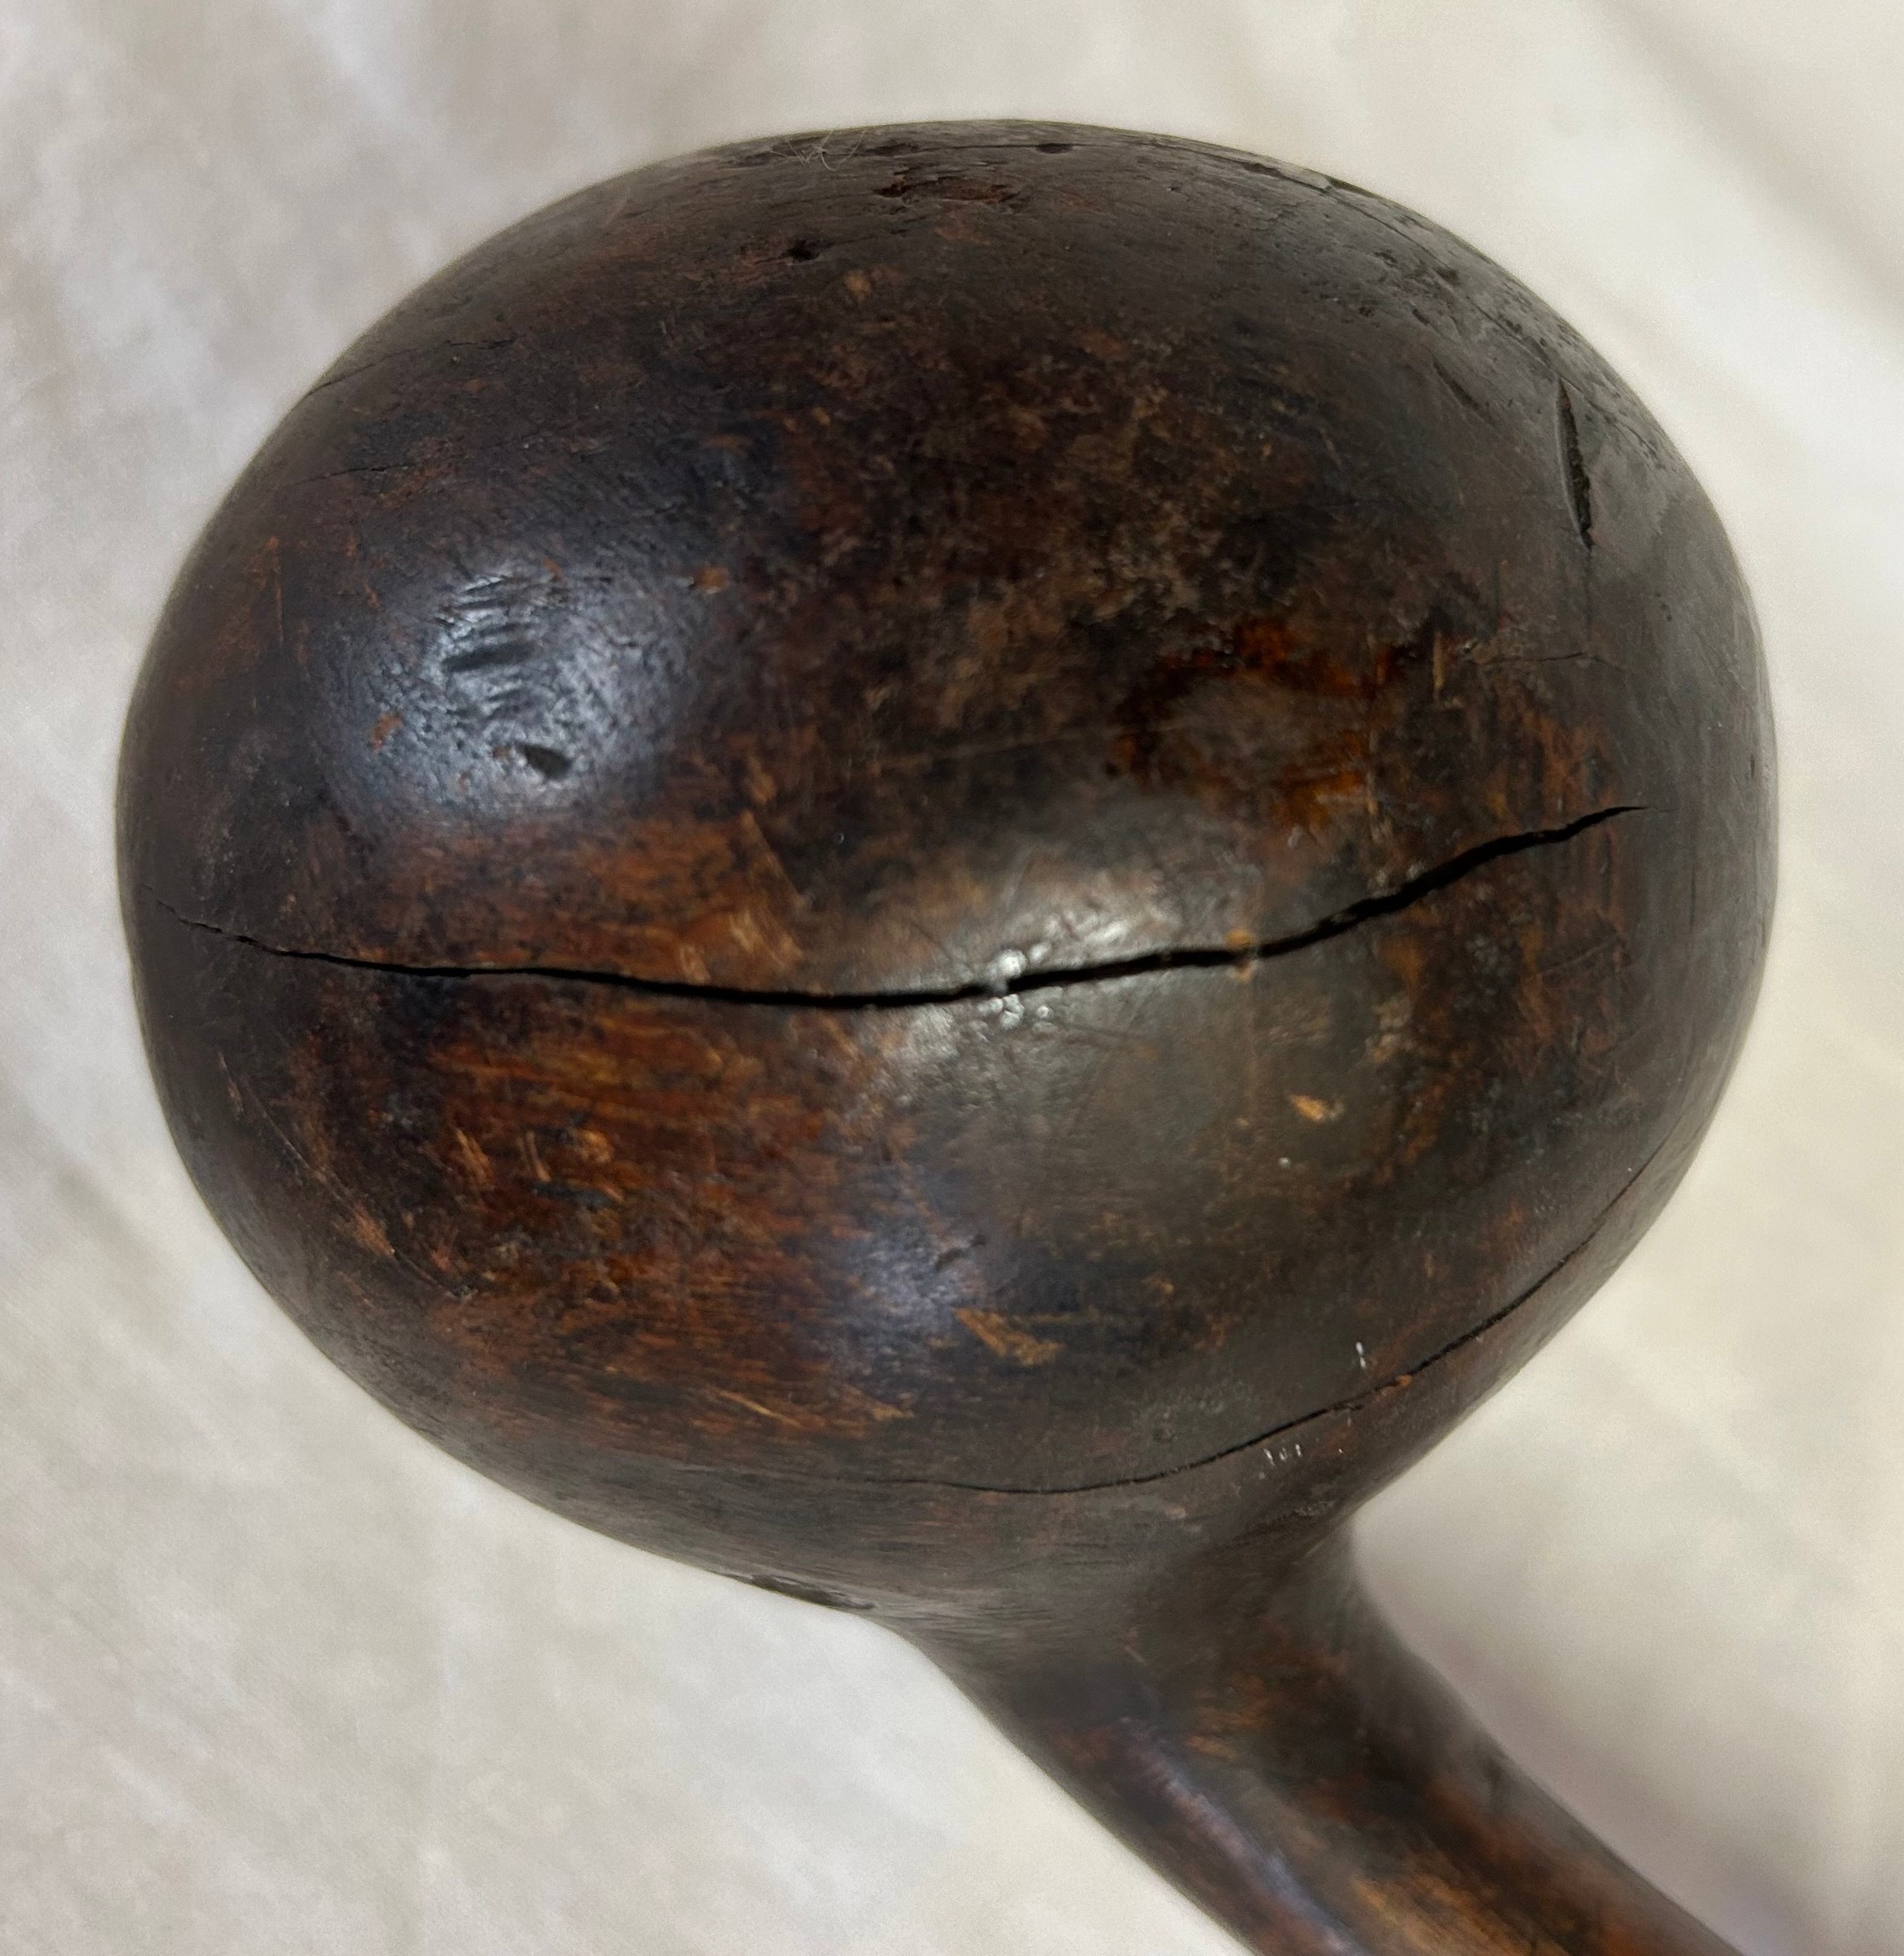 A Tribal throwing/fighting club with a heavy bulbous root head ? 58cm l - Image 4 of 4